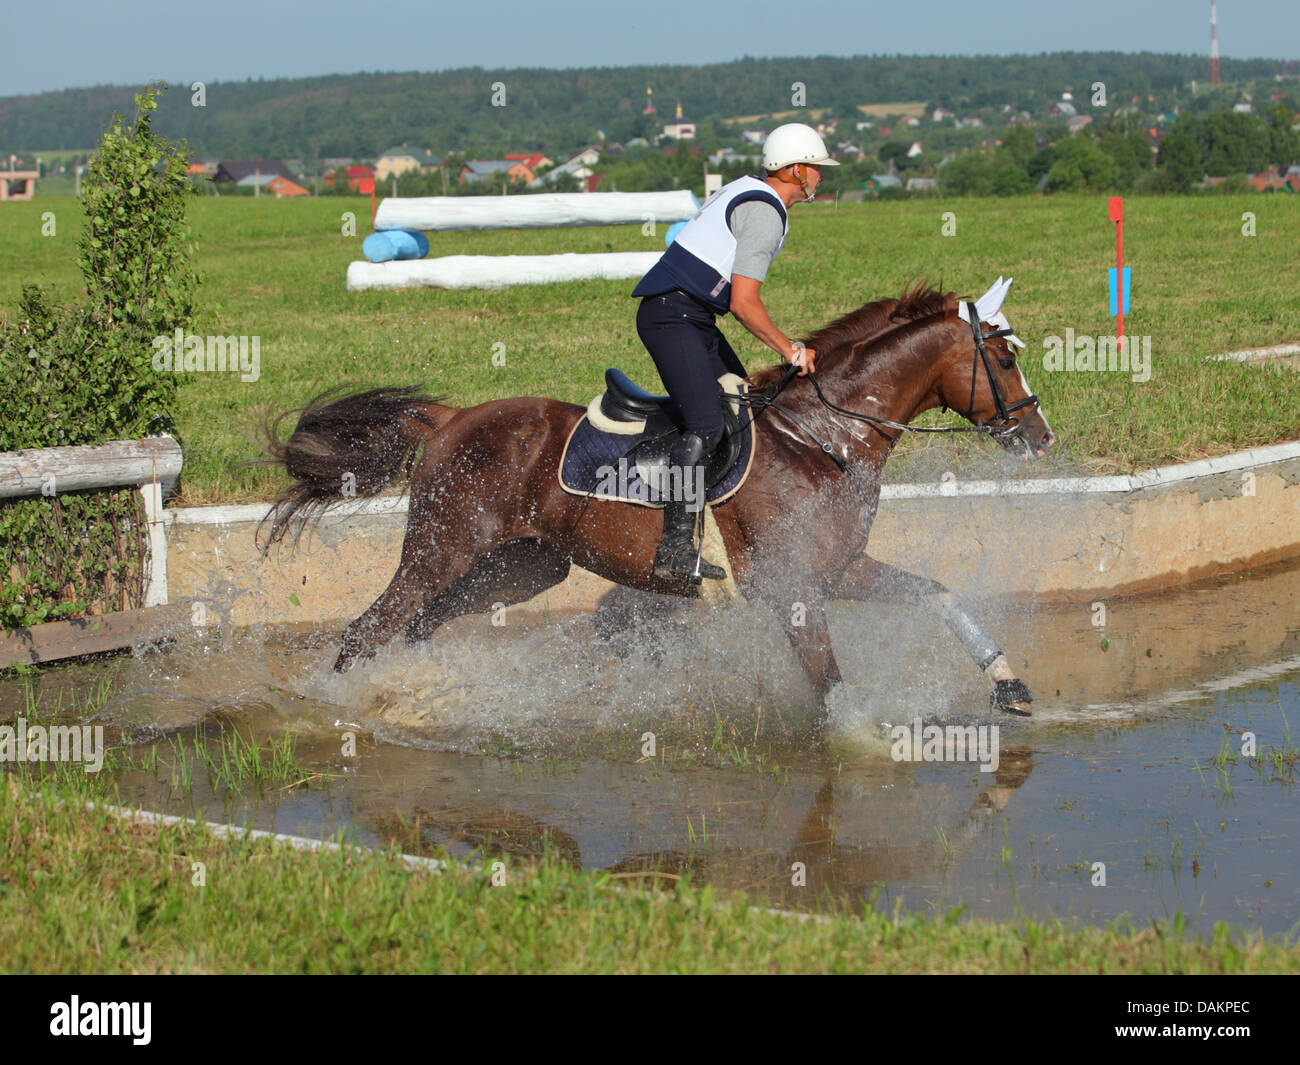 Rider and horse jump out of water at three day event horse trials Stock Photo